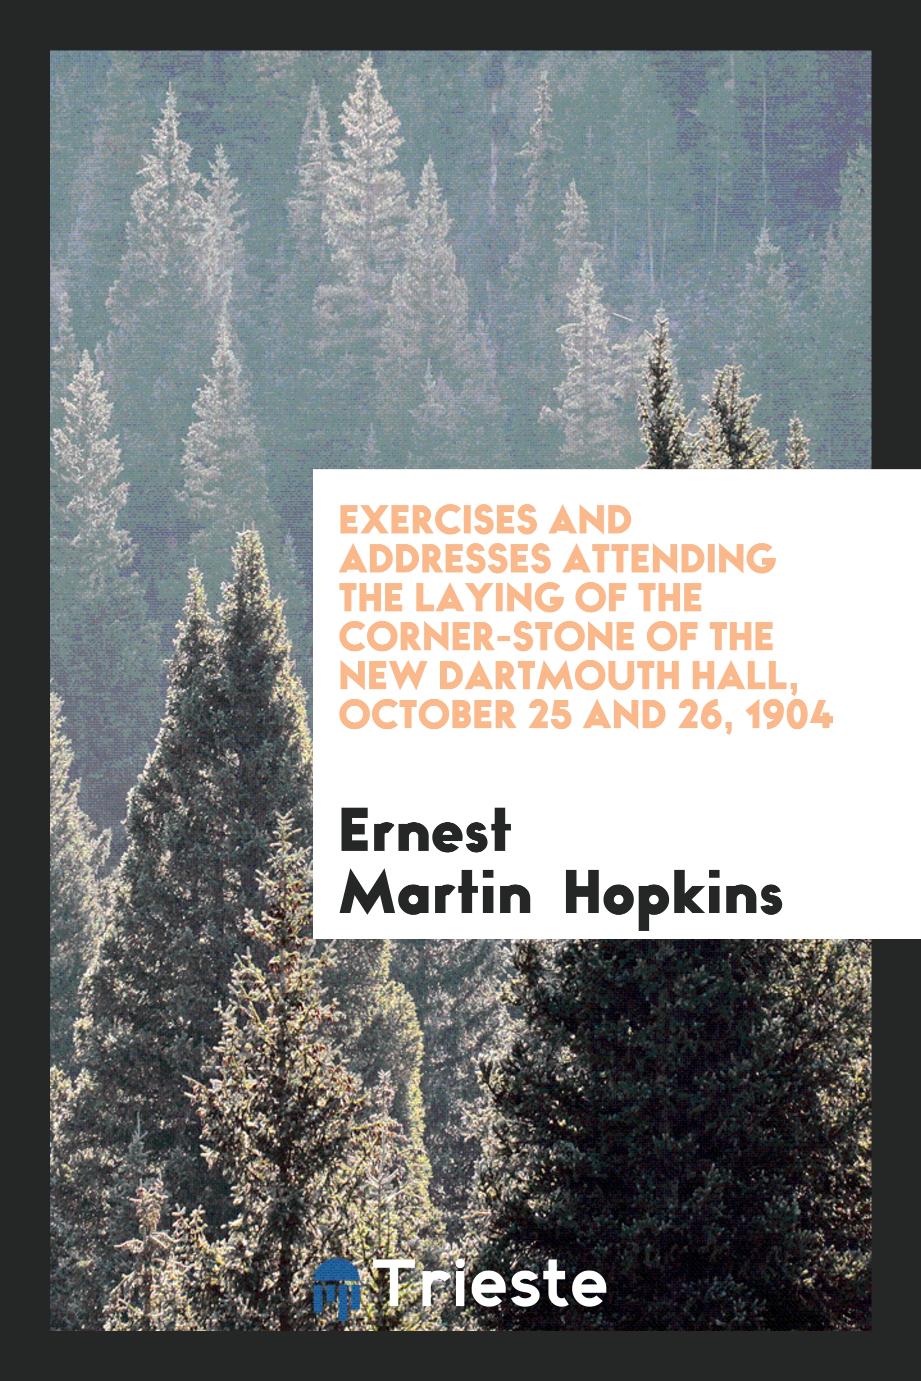 Exercises and Addresses Attending the Laying of the Corner-Stone of the New Dartmouth Hall, October 25 and 26, 1904